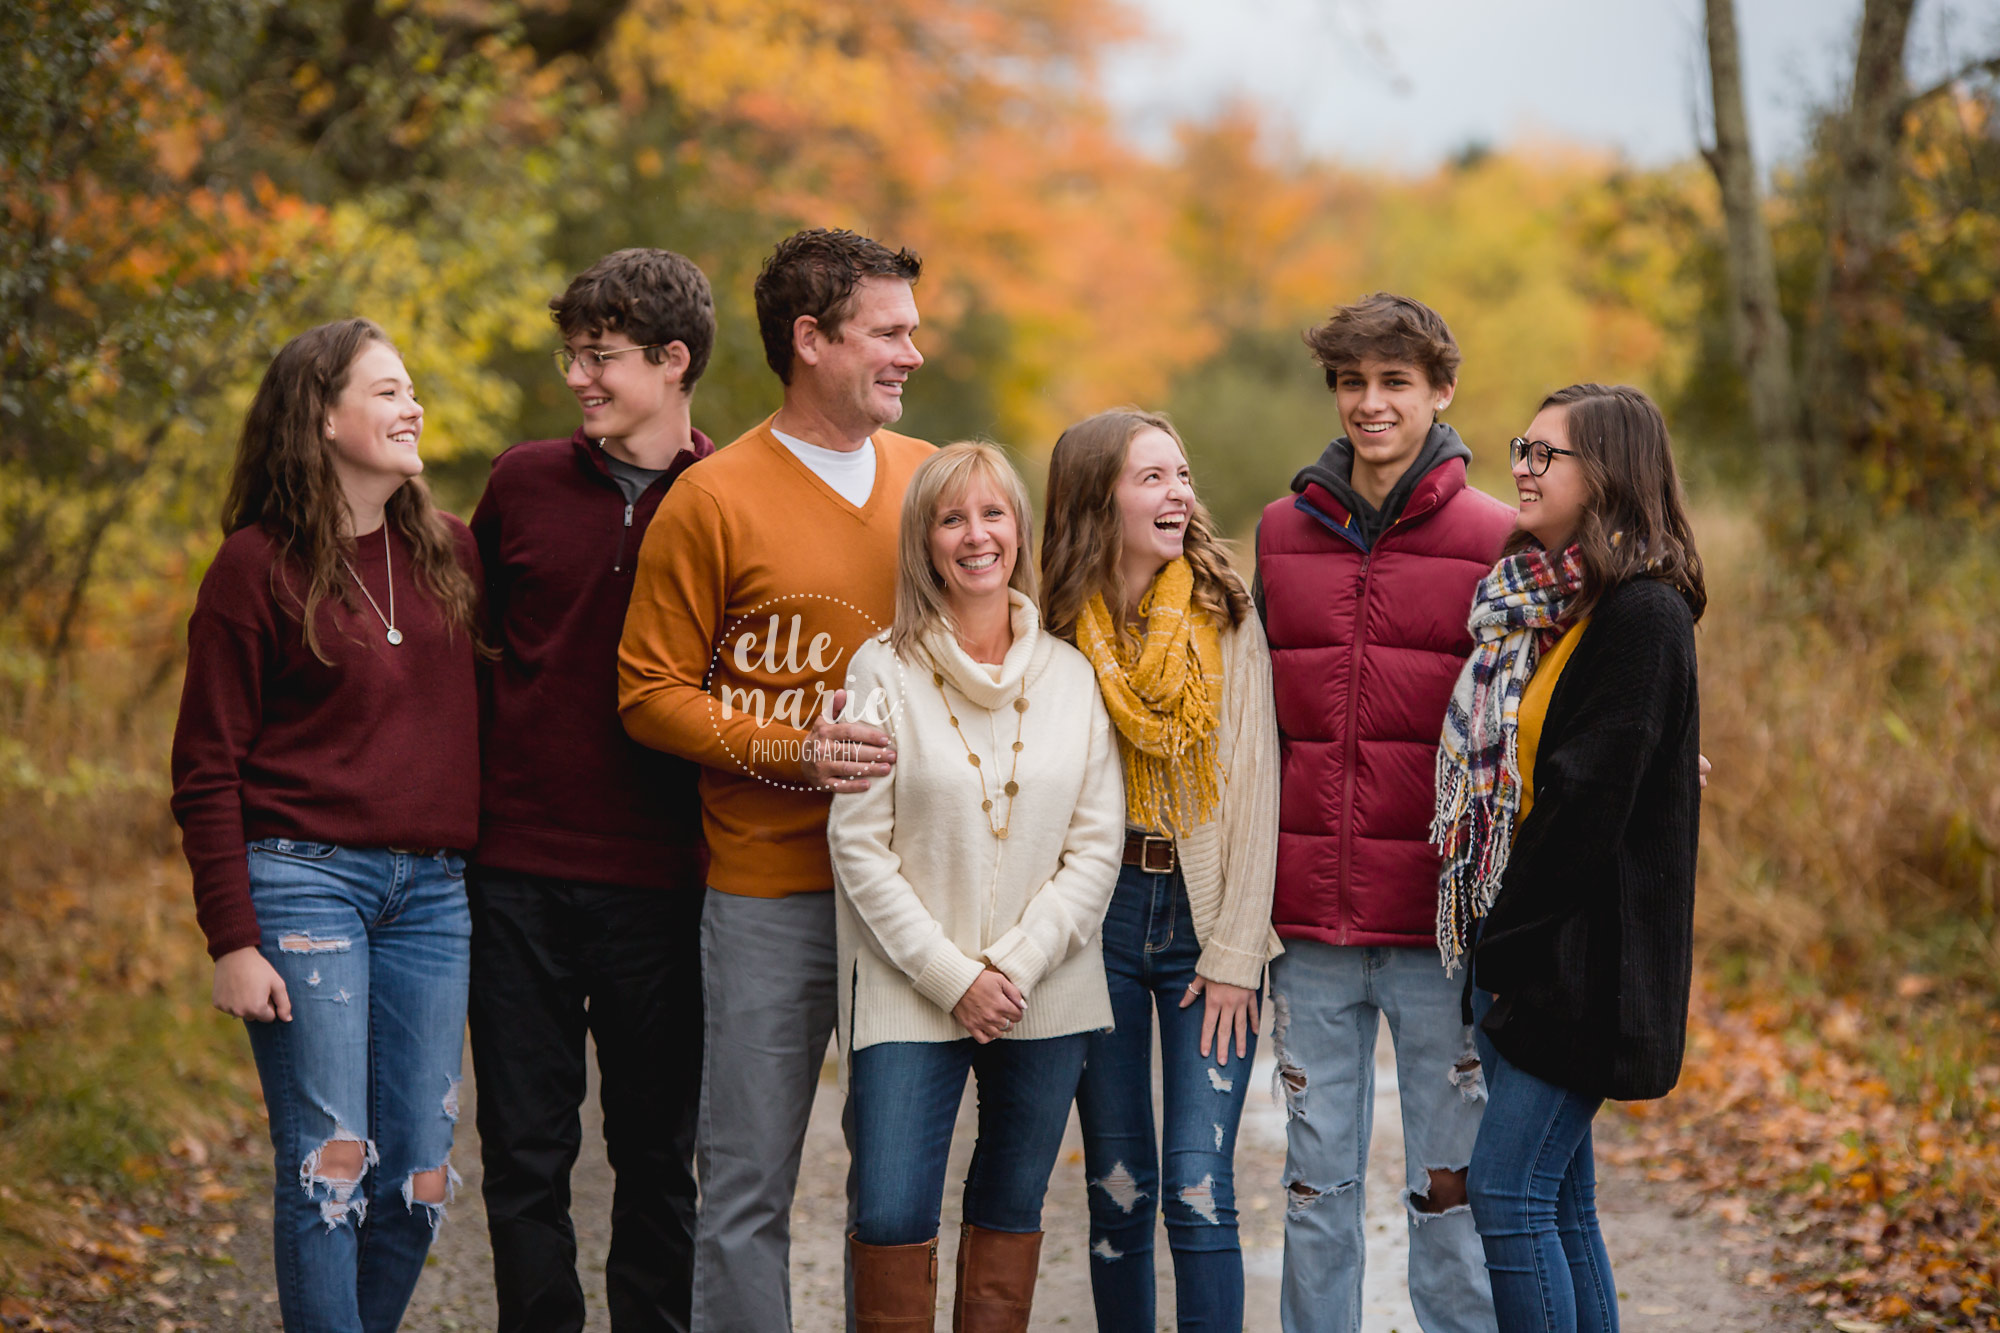 blended family of 7 with teenagers share a laugh